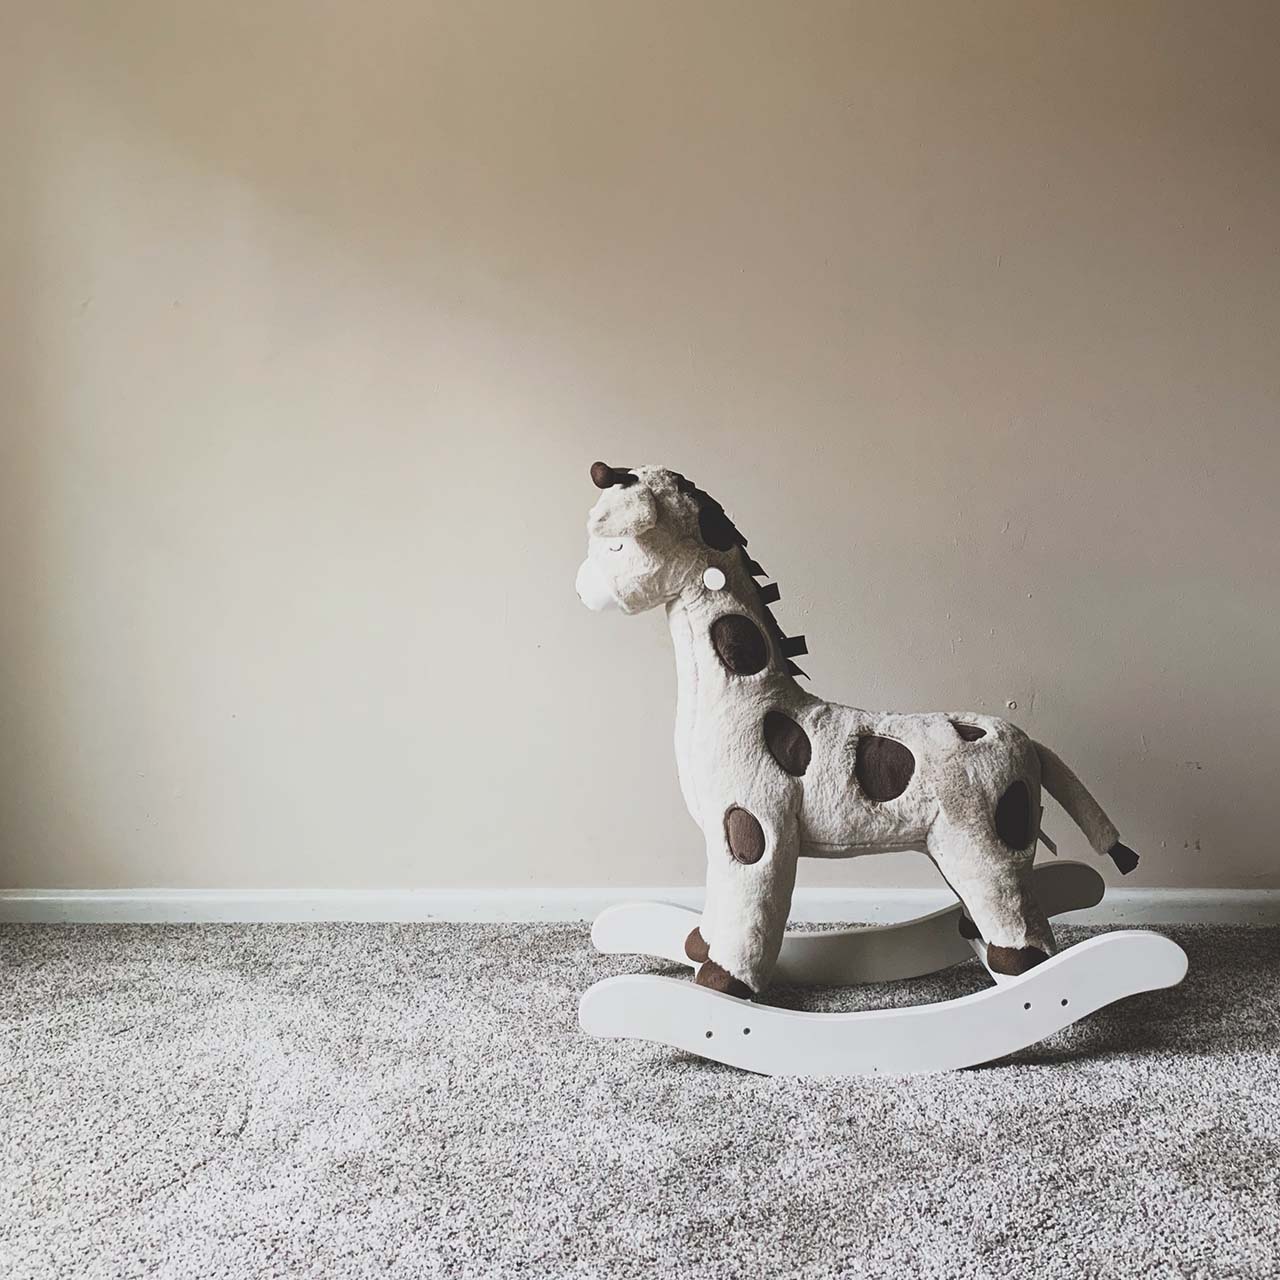 a rocking horse in a children's playroom